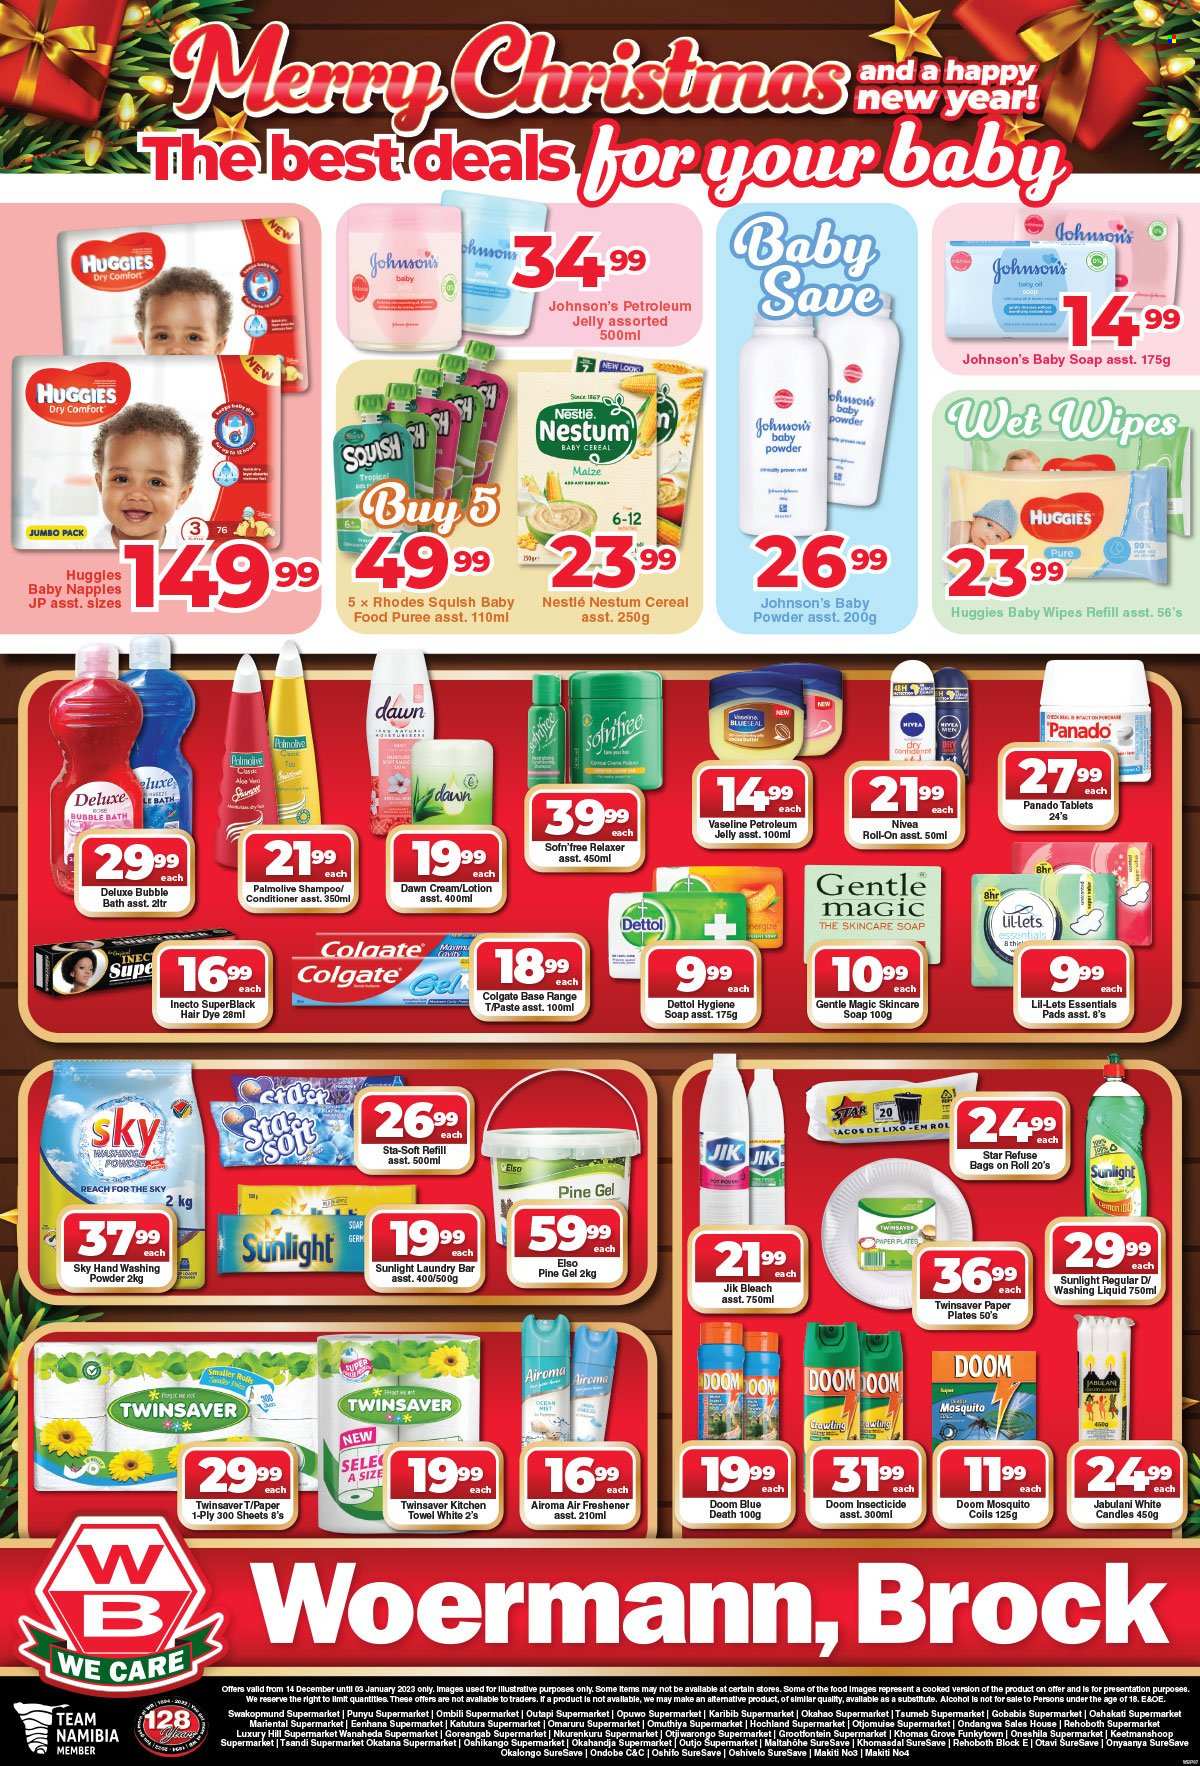 Woermann Brock catalogue  - 14/12/2022 - 03/01/2023 - Sales products - Nestlé, cereals, alcohol, wipes, Huggies, baby wipes, Johnson's, kitchen towels, Dettol, bleach, laundry powder, laundry soap bar, Sunlight, bubble bath, shampoo, Nivea, Palmolive, Vaseline, soap, Colgate, Lil-lets, petroleum jelly, Gentle Magic, conditioner, relaxer, body lotion, roll-on. Page 7.